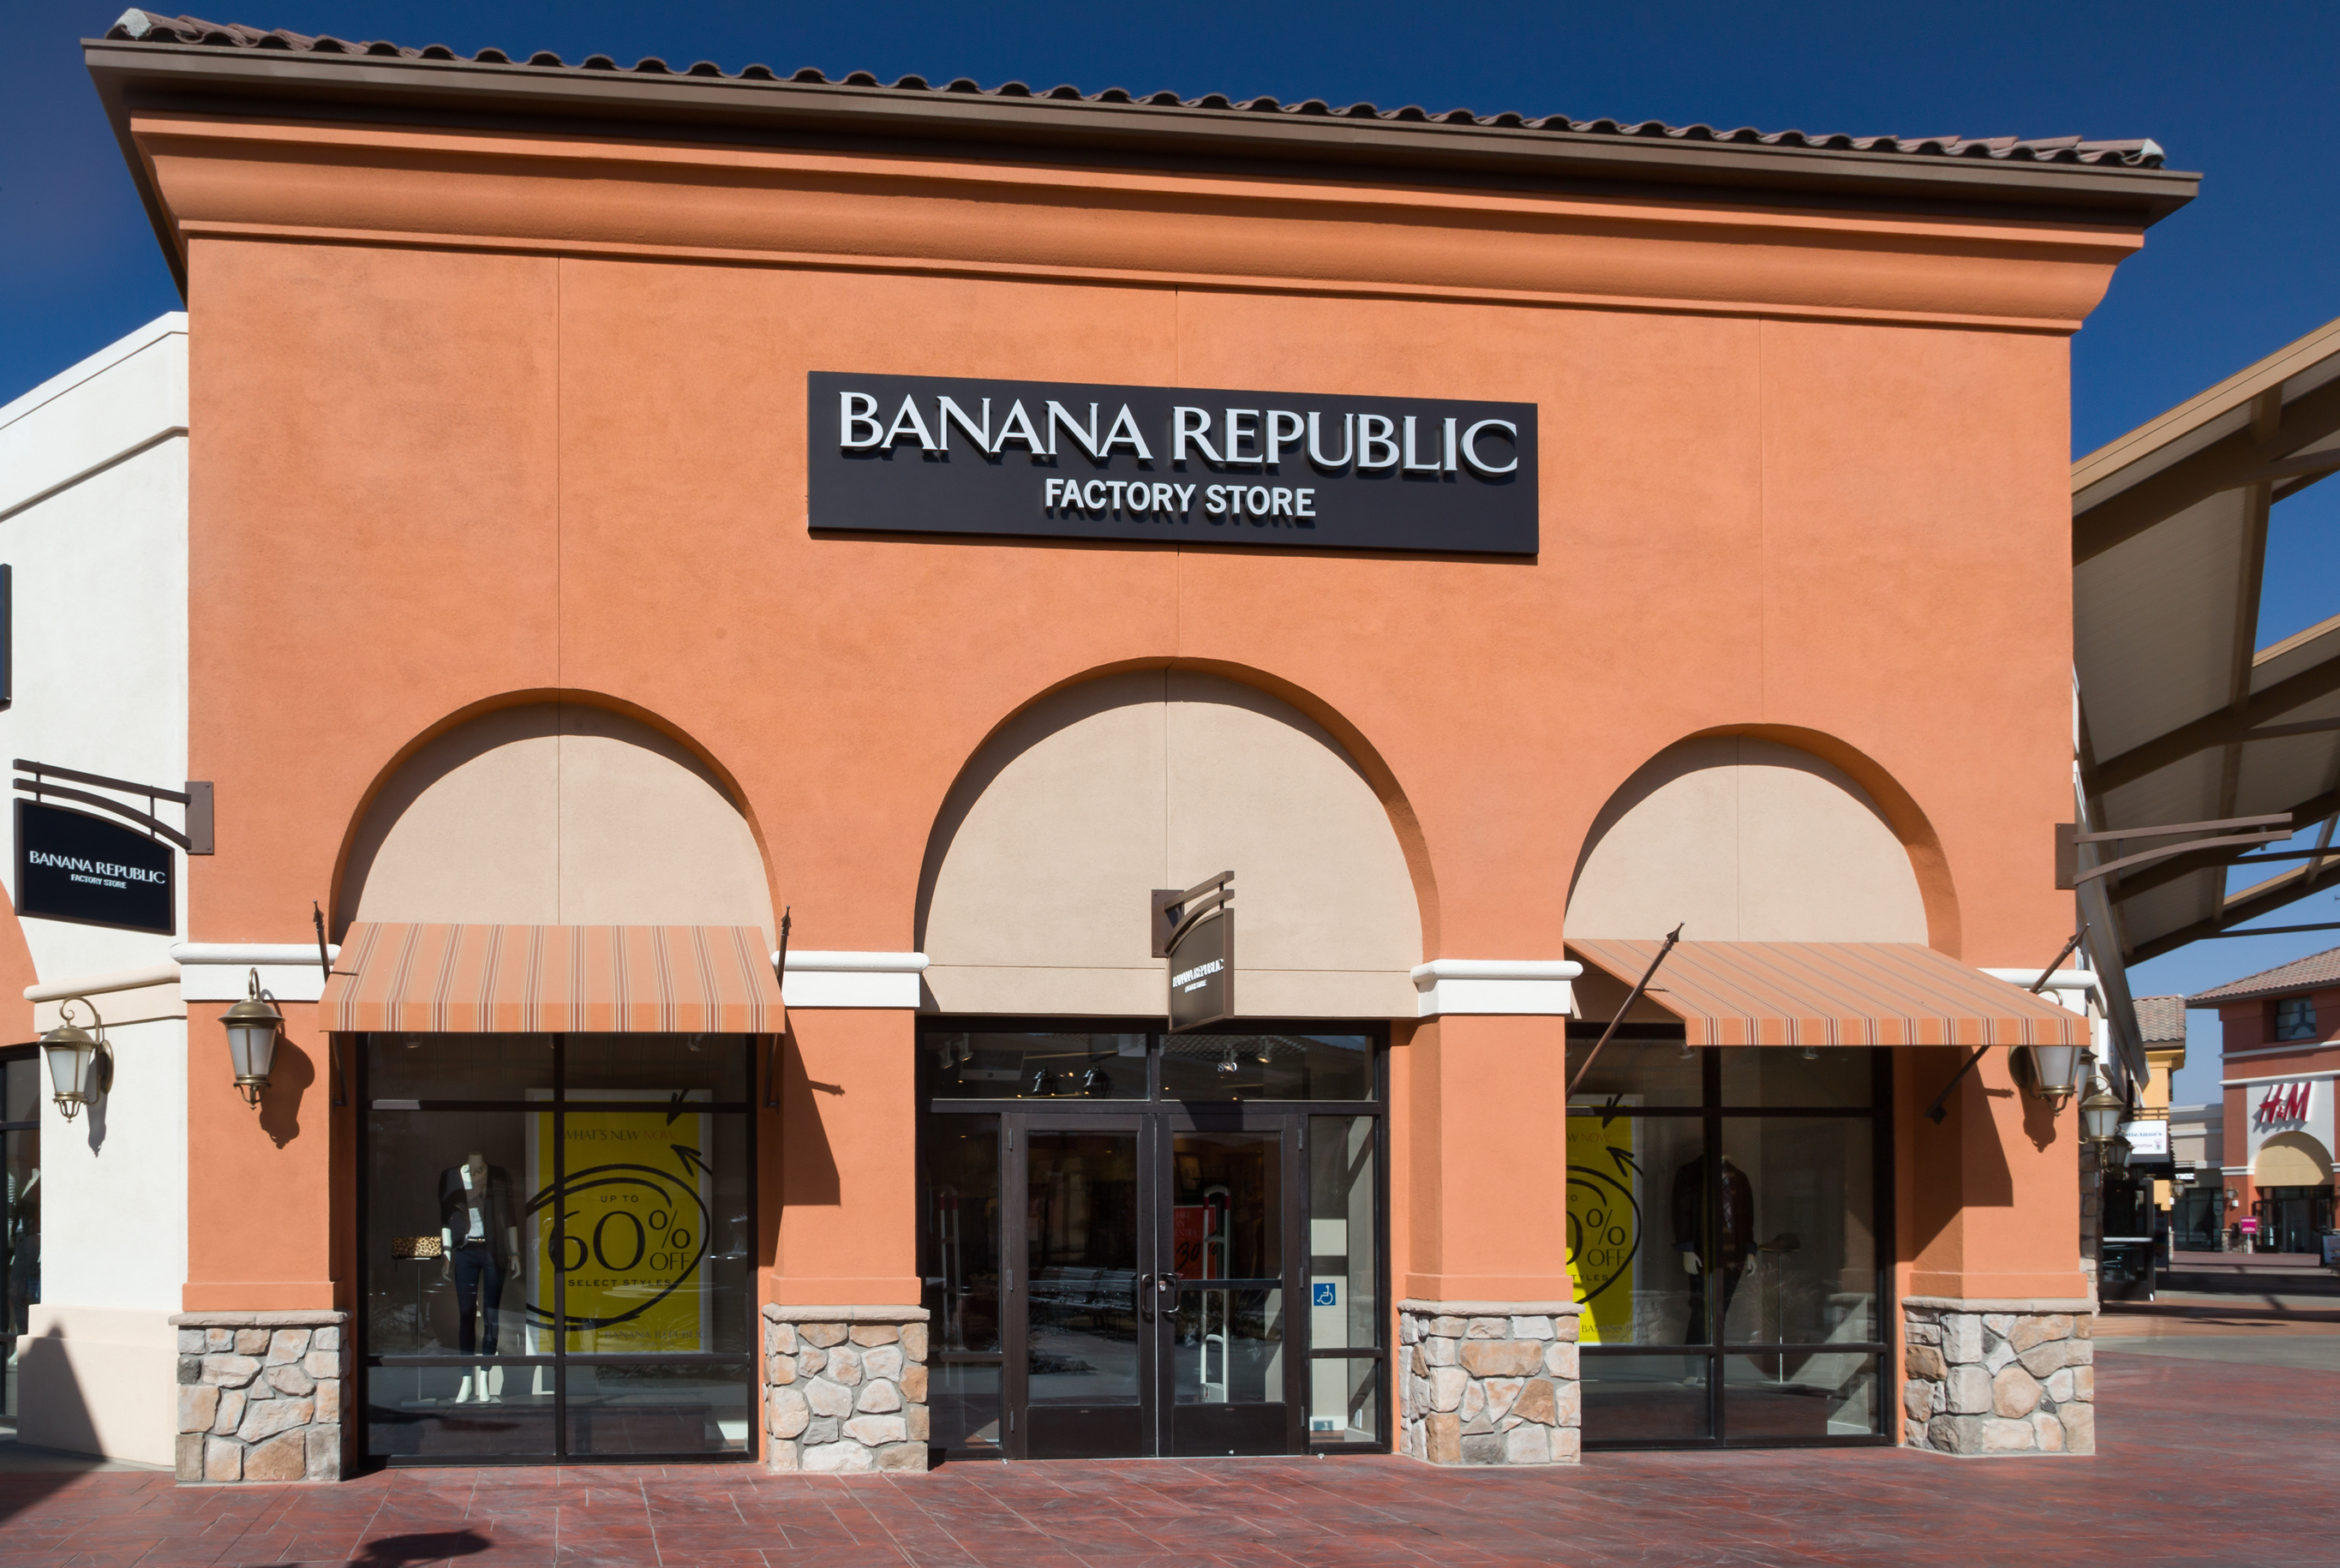 Banana Republic Factory: Take an extra 60% off clearance